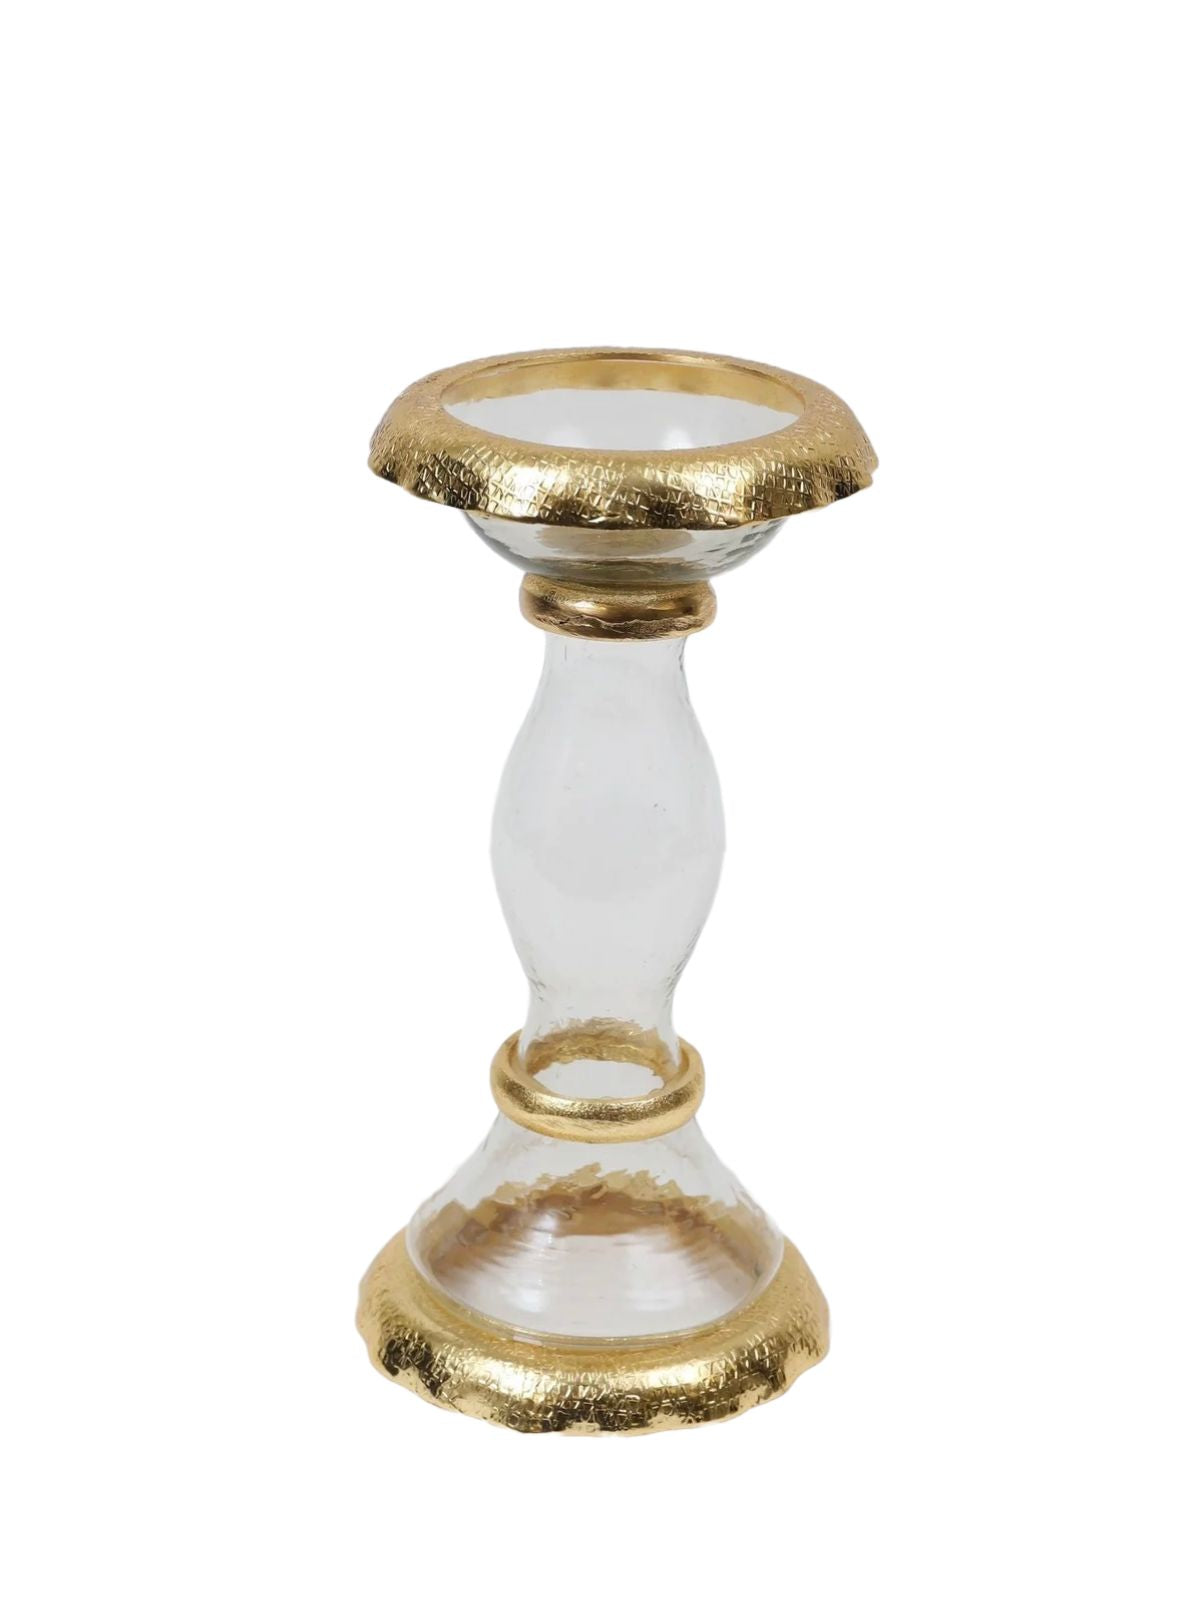 Glass Candle Holder with Stainless Steel Gold Ripple Edge Border, perfect for enhancing home decor. Measures, 5W x 10H inches.